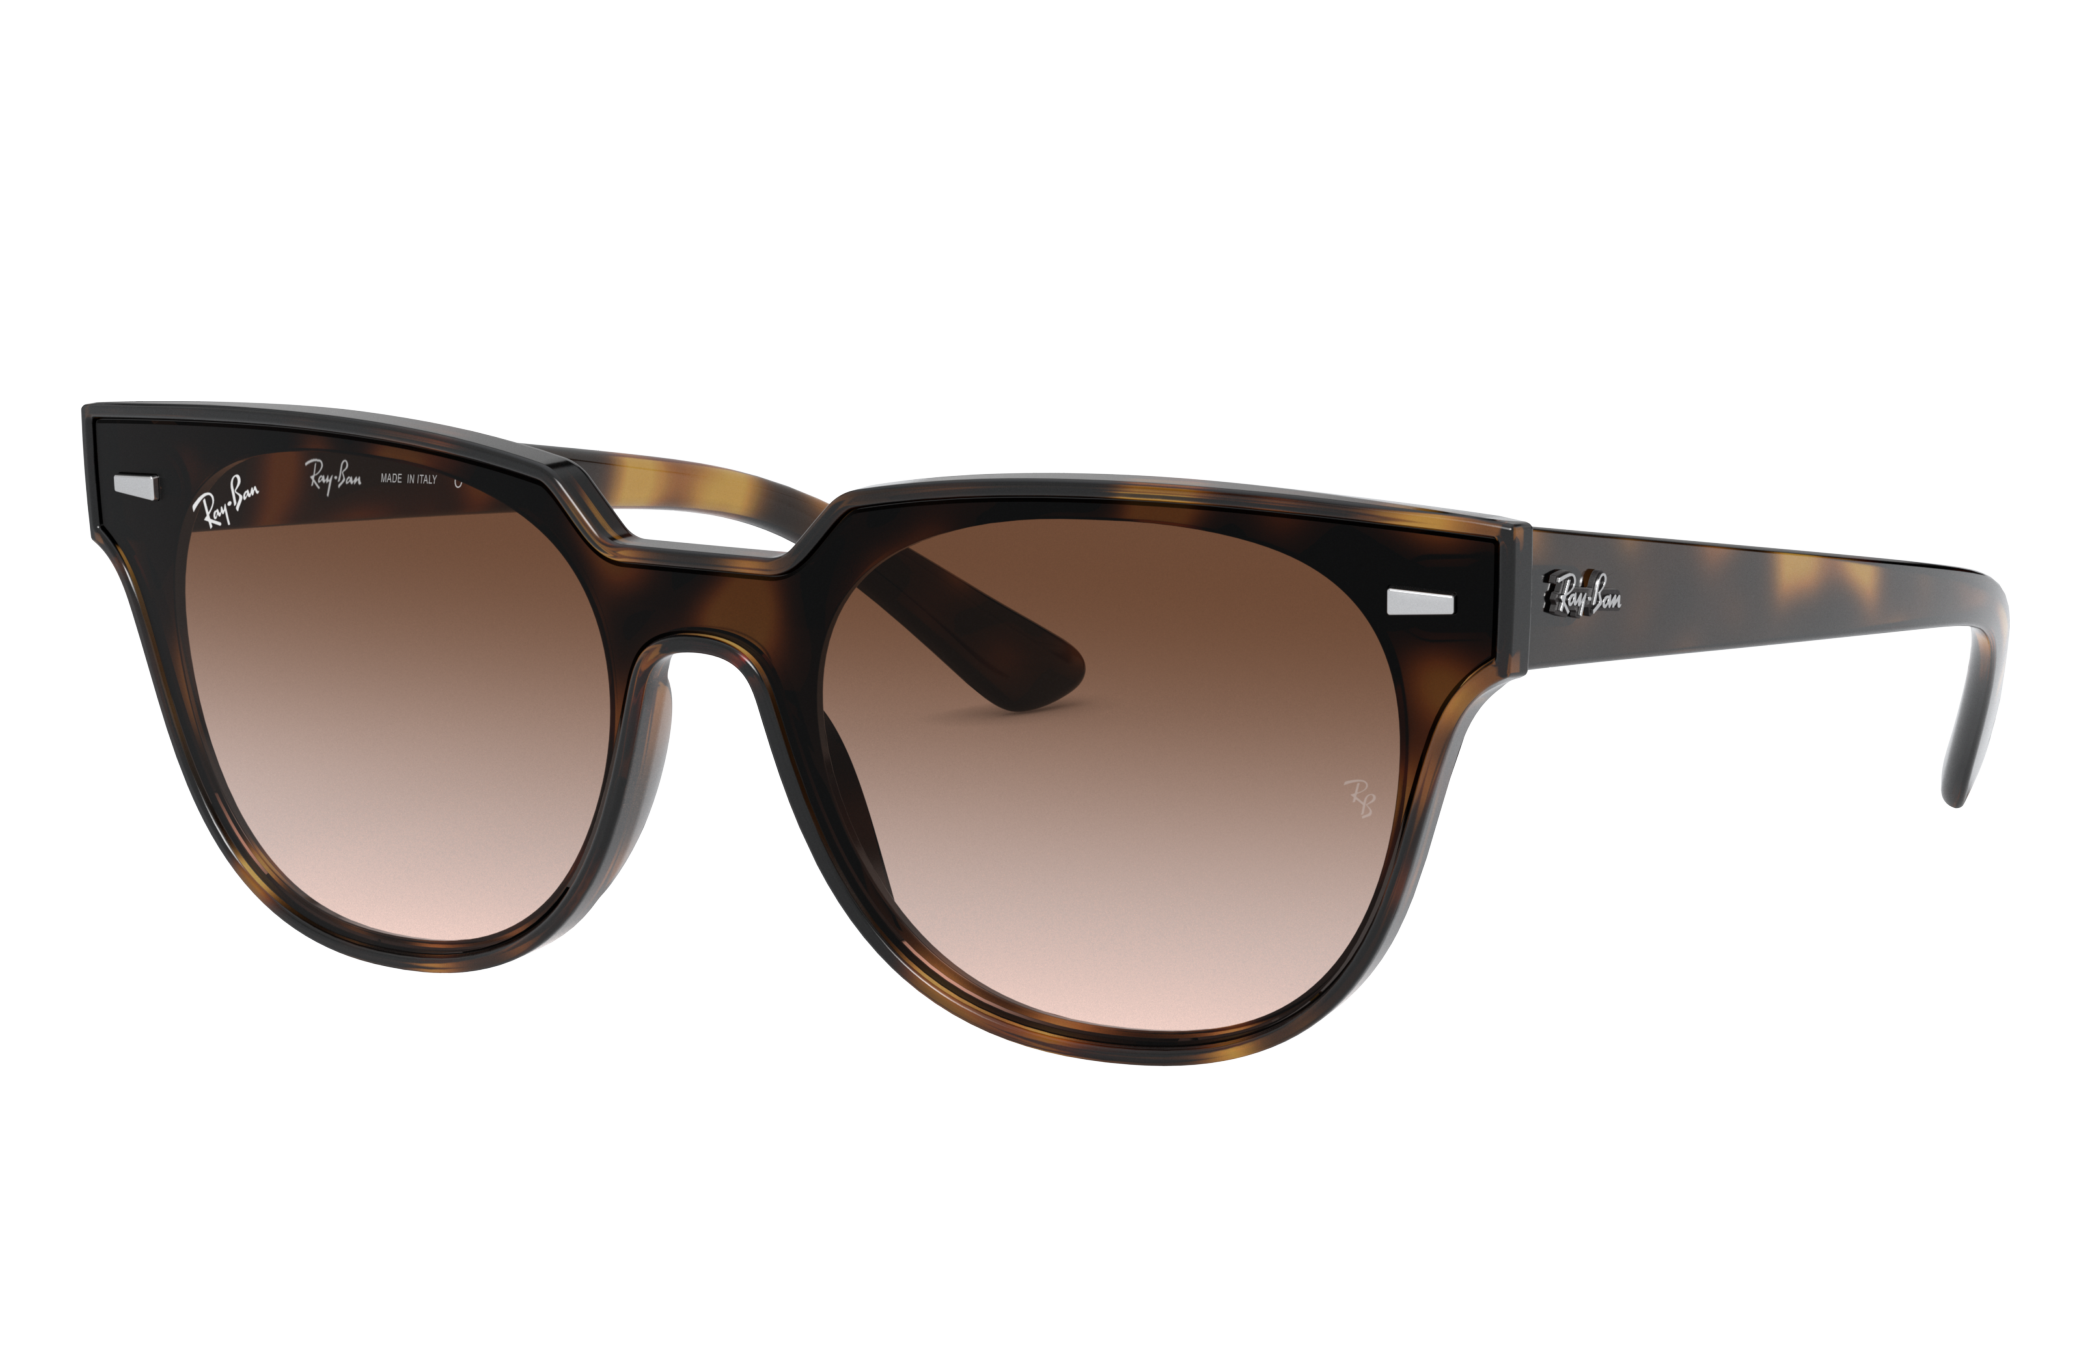 Blaze Meteor Sunglasses in Tortoise and Brown - RB4368NF | Ray-Ban®